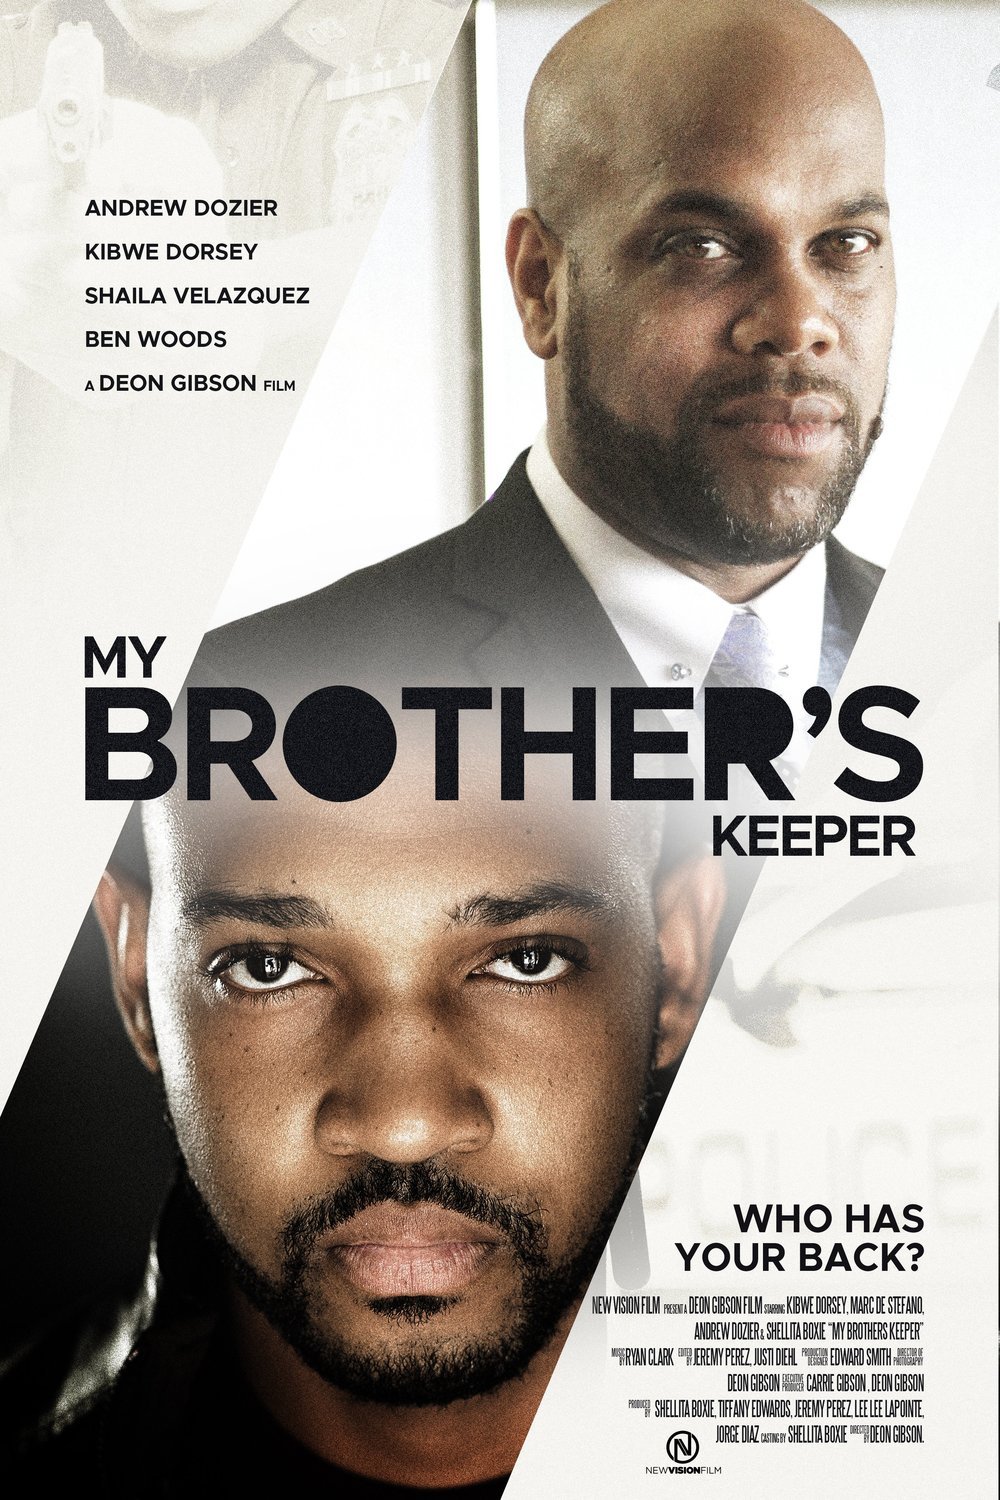 Poster of the movie My Brother's Keeper